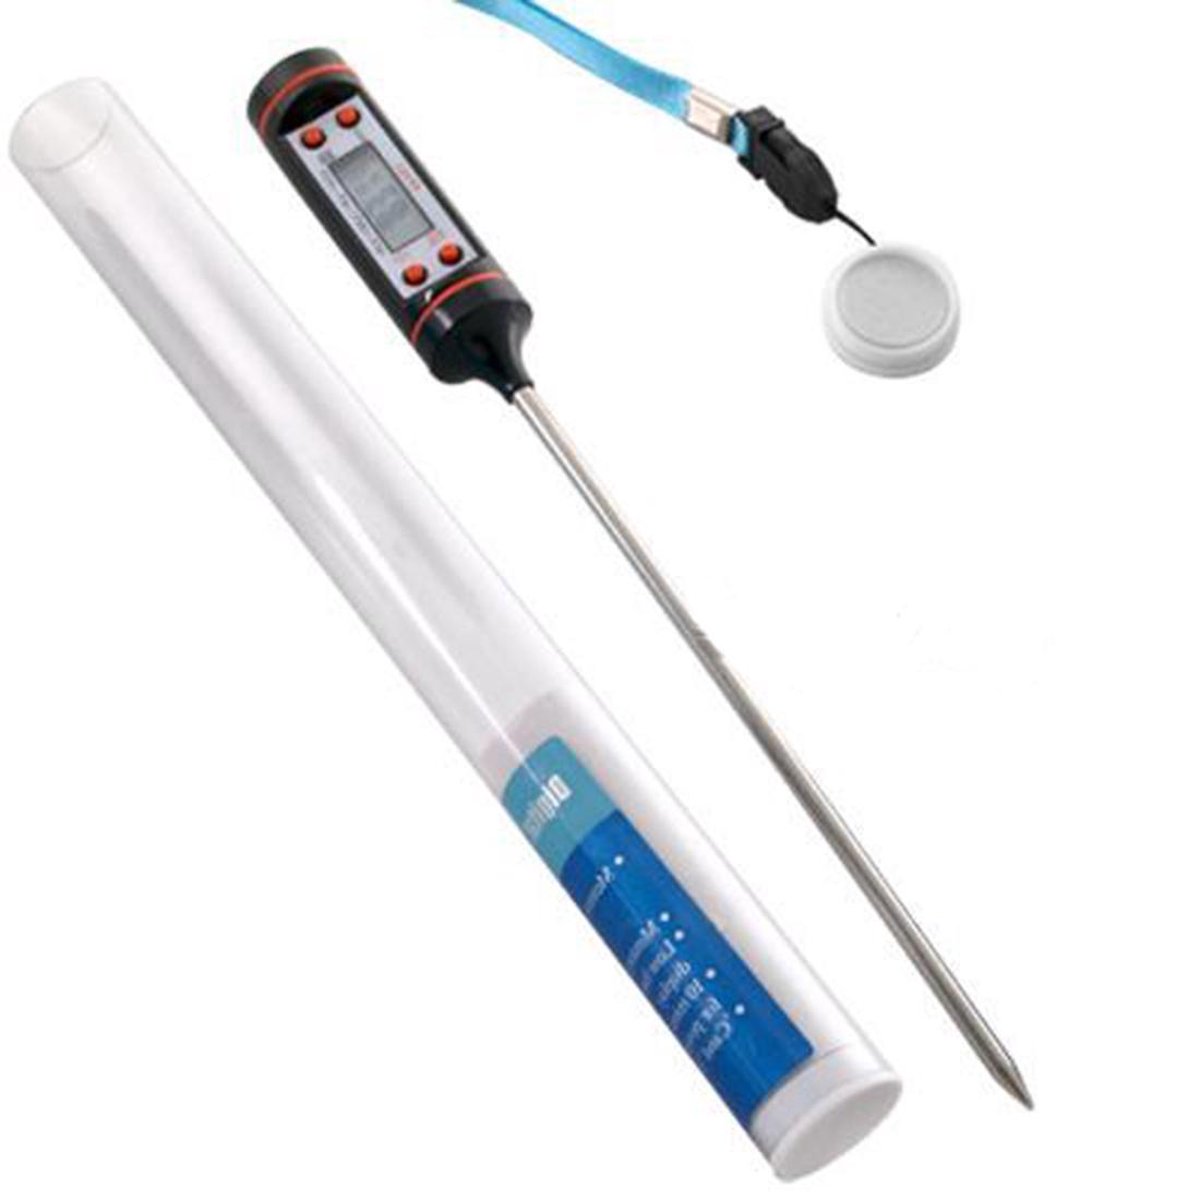 Spaans kampioen persoon Digitale Vleesthermometer - BBQ thermometer - Voedselthermometer | bol.com